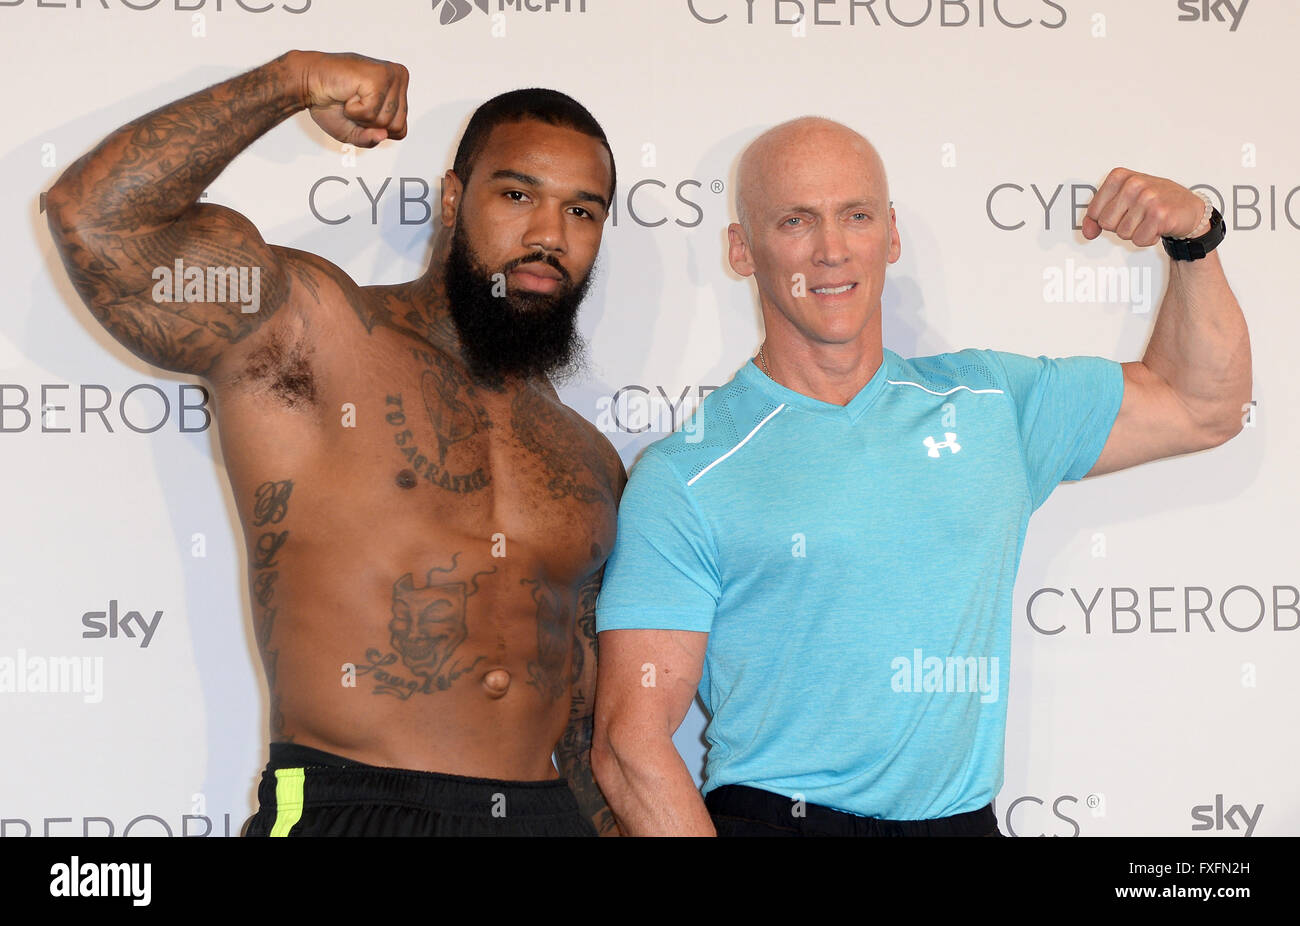 Berlin, Germany. 14th Apr, 2016. US fitness coachr James (the Beast) Wilson (L) and US fitness coach David Kirsch pose during the opening of the fitness studio 'World of Cyberobics' in Berlin, Germany, 14 April 2016. The fitness arena will open on 18 April 2016. Photo: Britta Pedersen/dpa/Alamy Live News Stock Photo